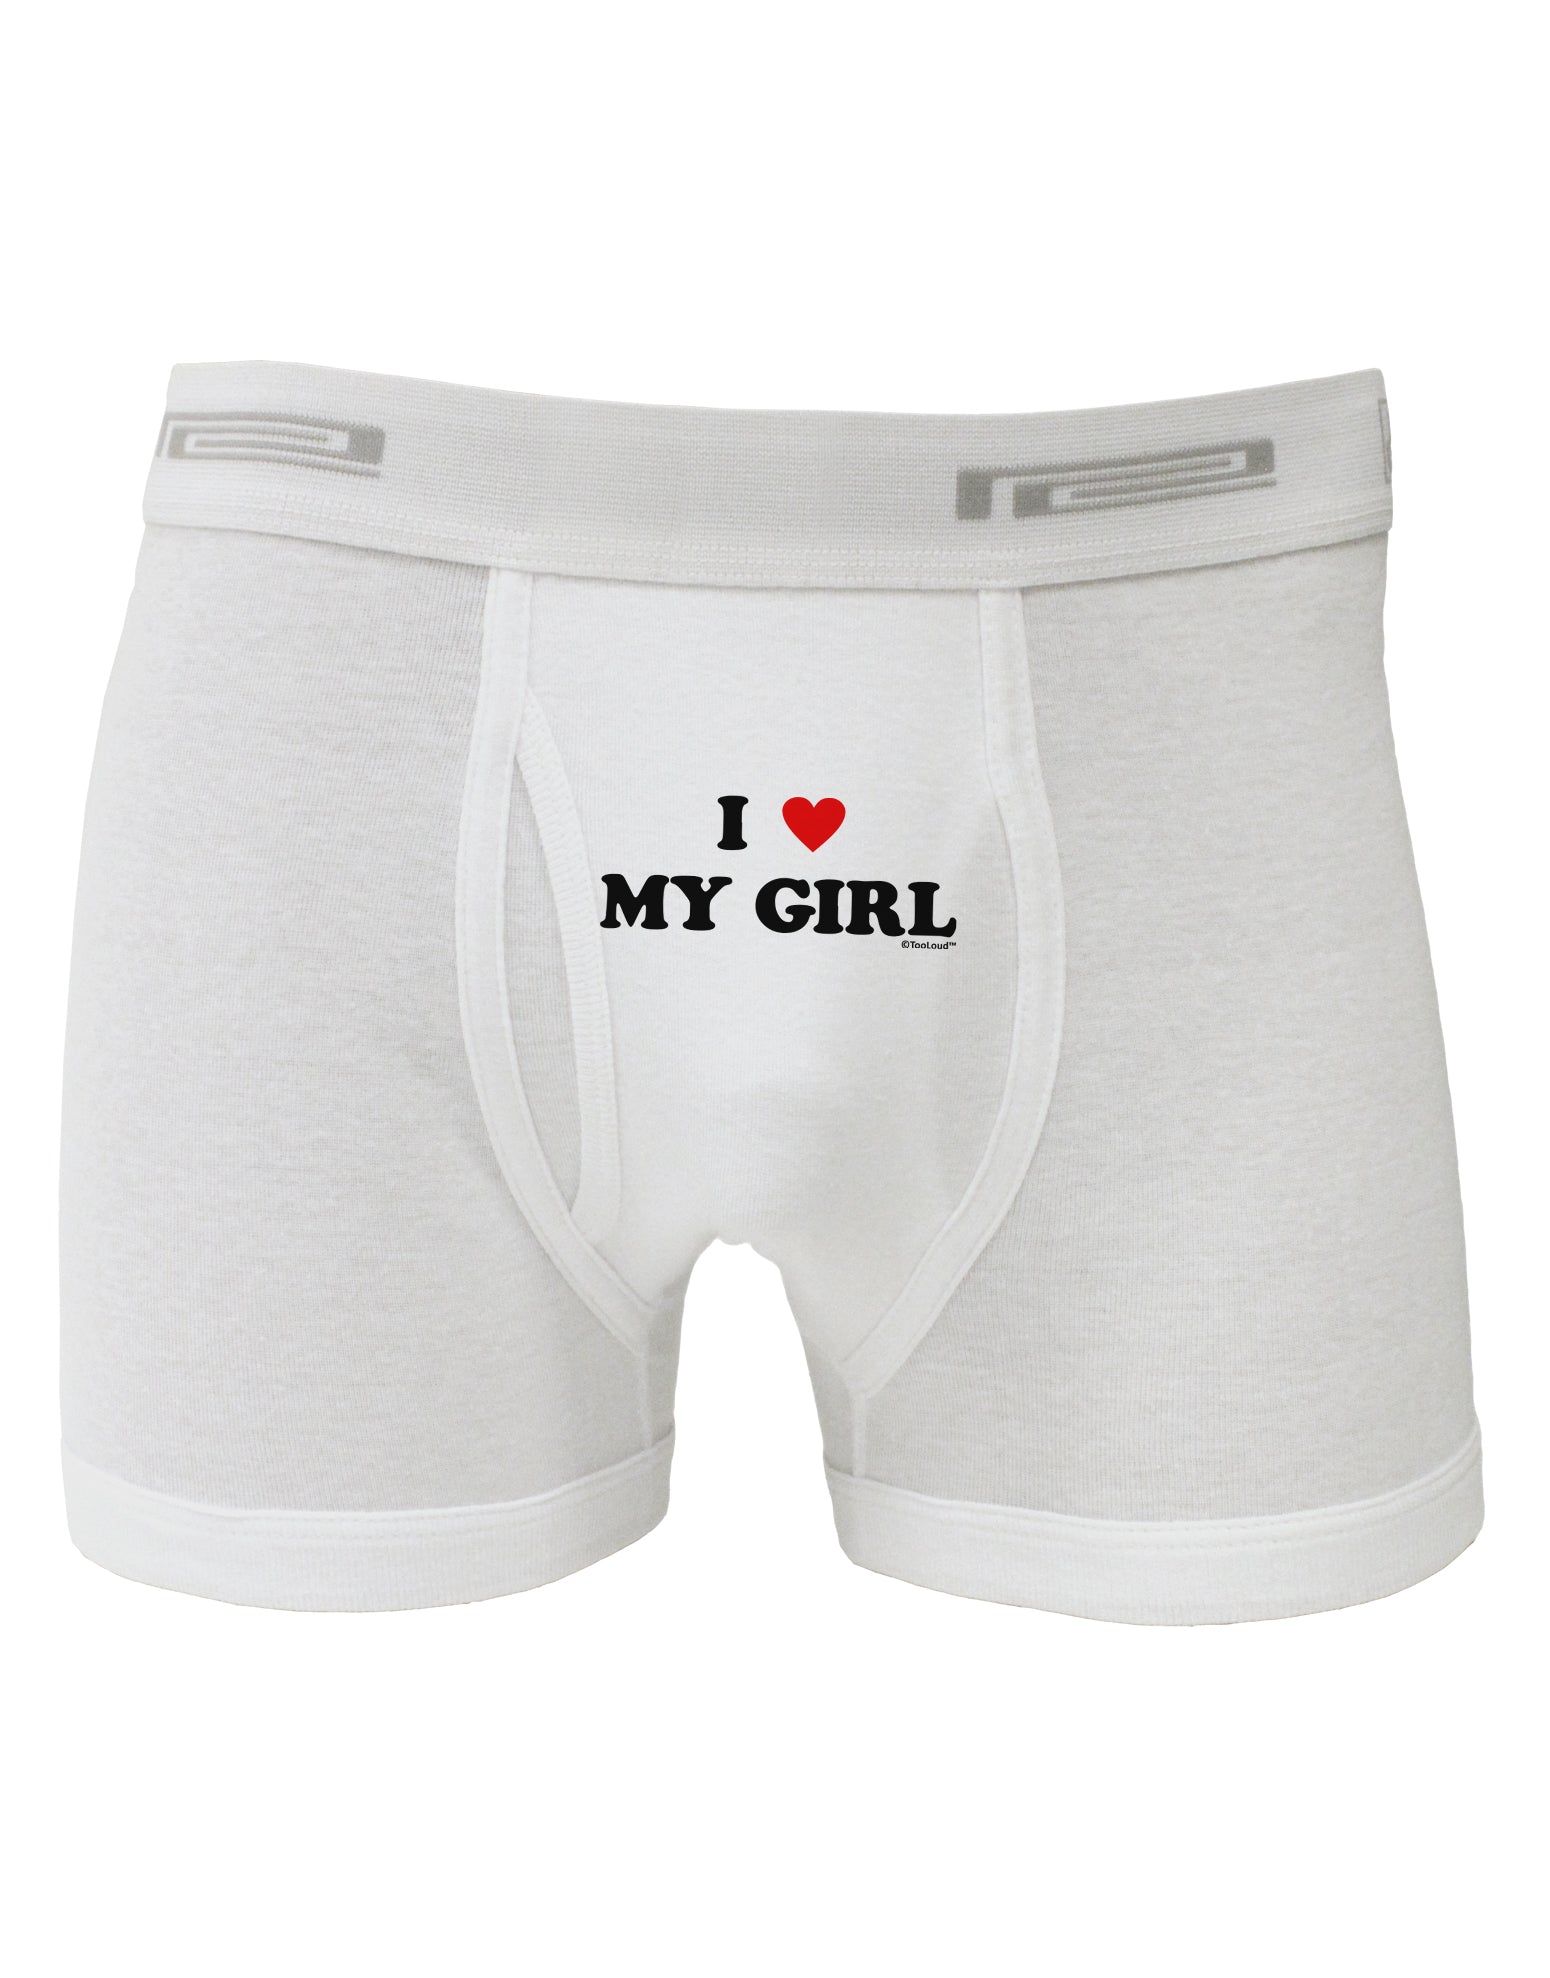 Custom Underwear With Your Photos - Personalize Your Undies